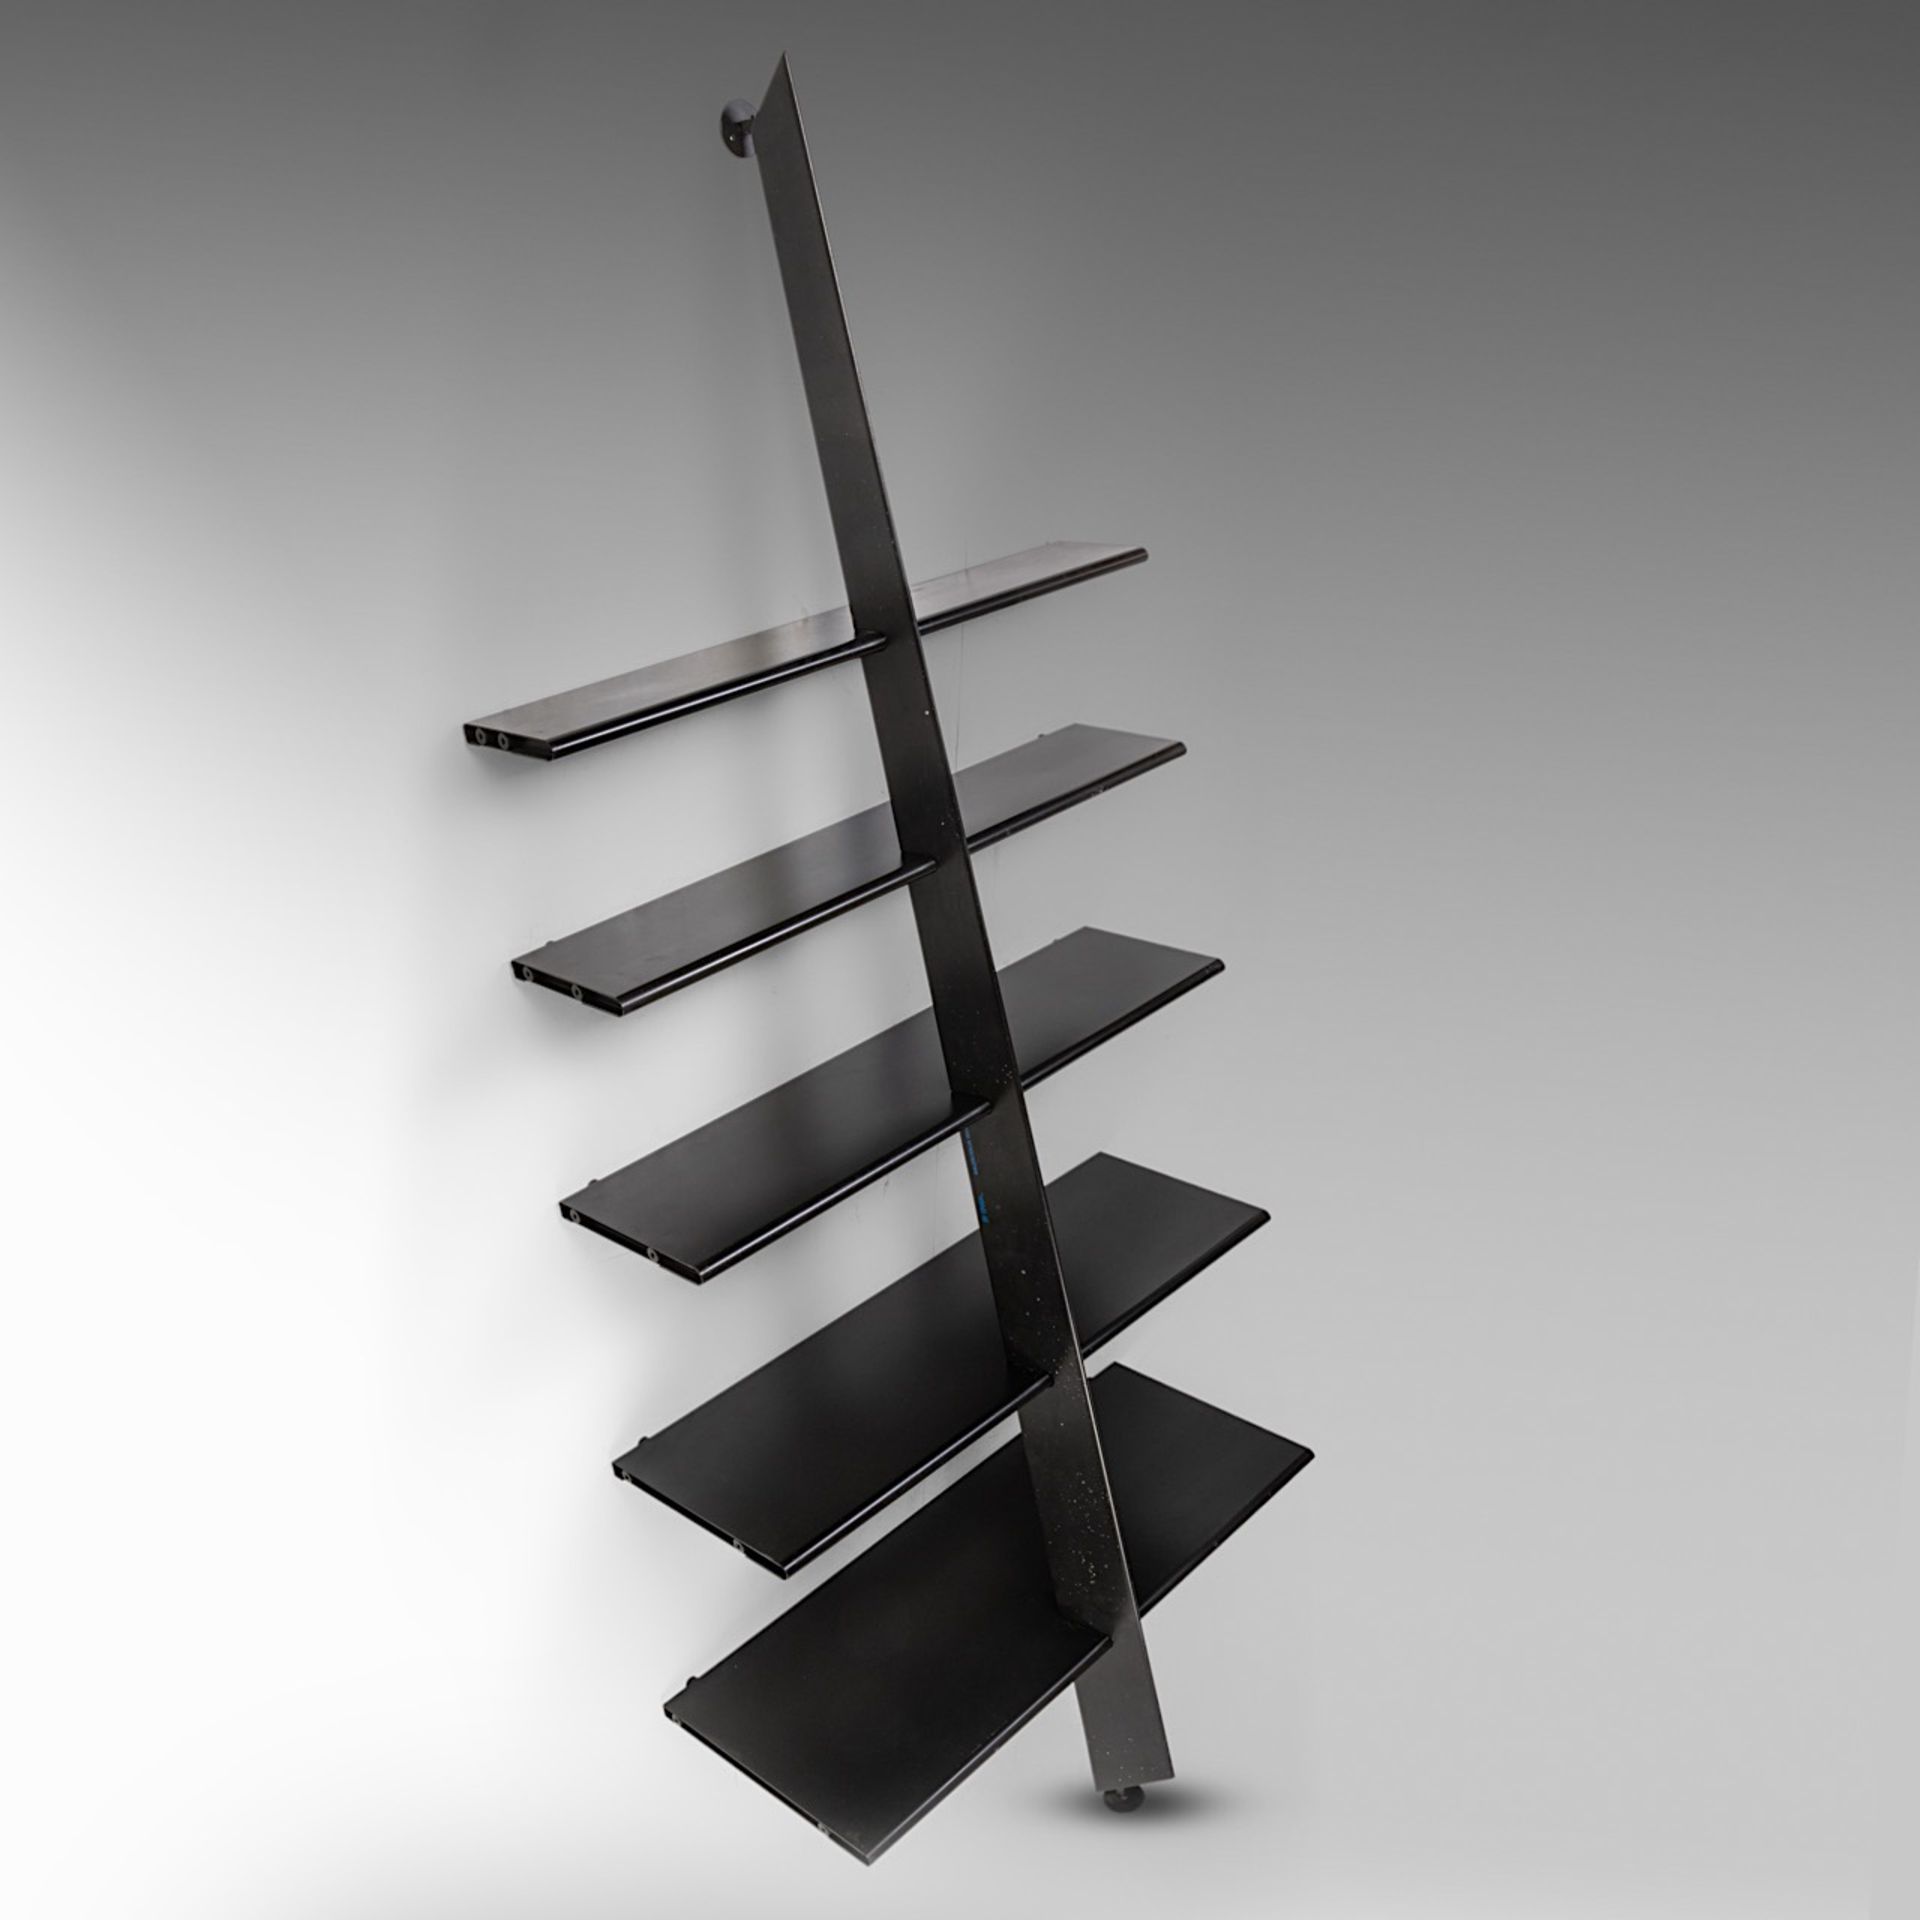 A black lacquered 'McGee' design rack by Philippe Starck for Baleri, 1980s, H 240 - W 100 cm